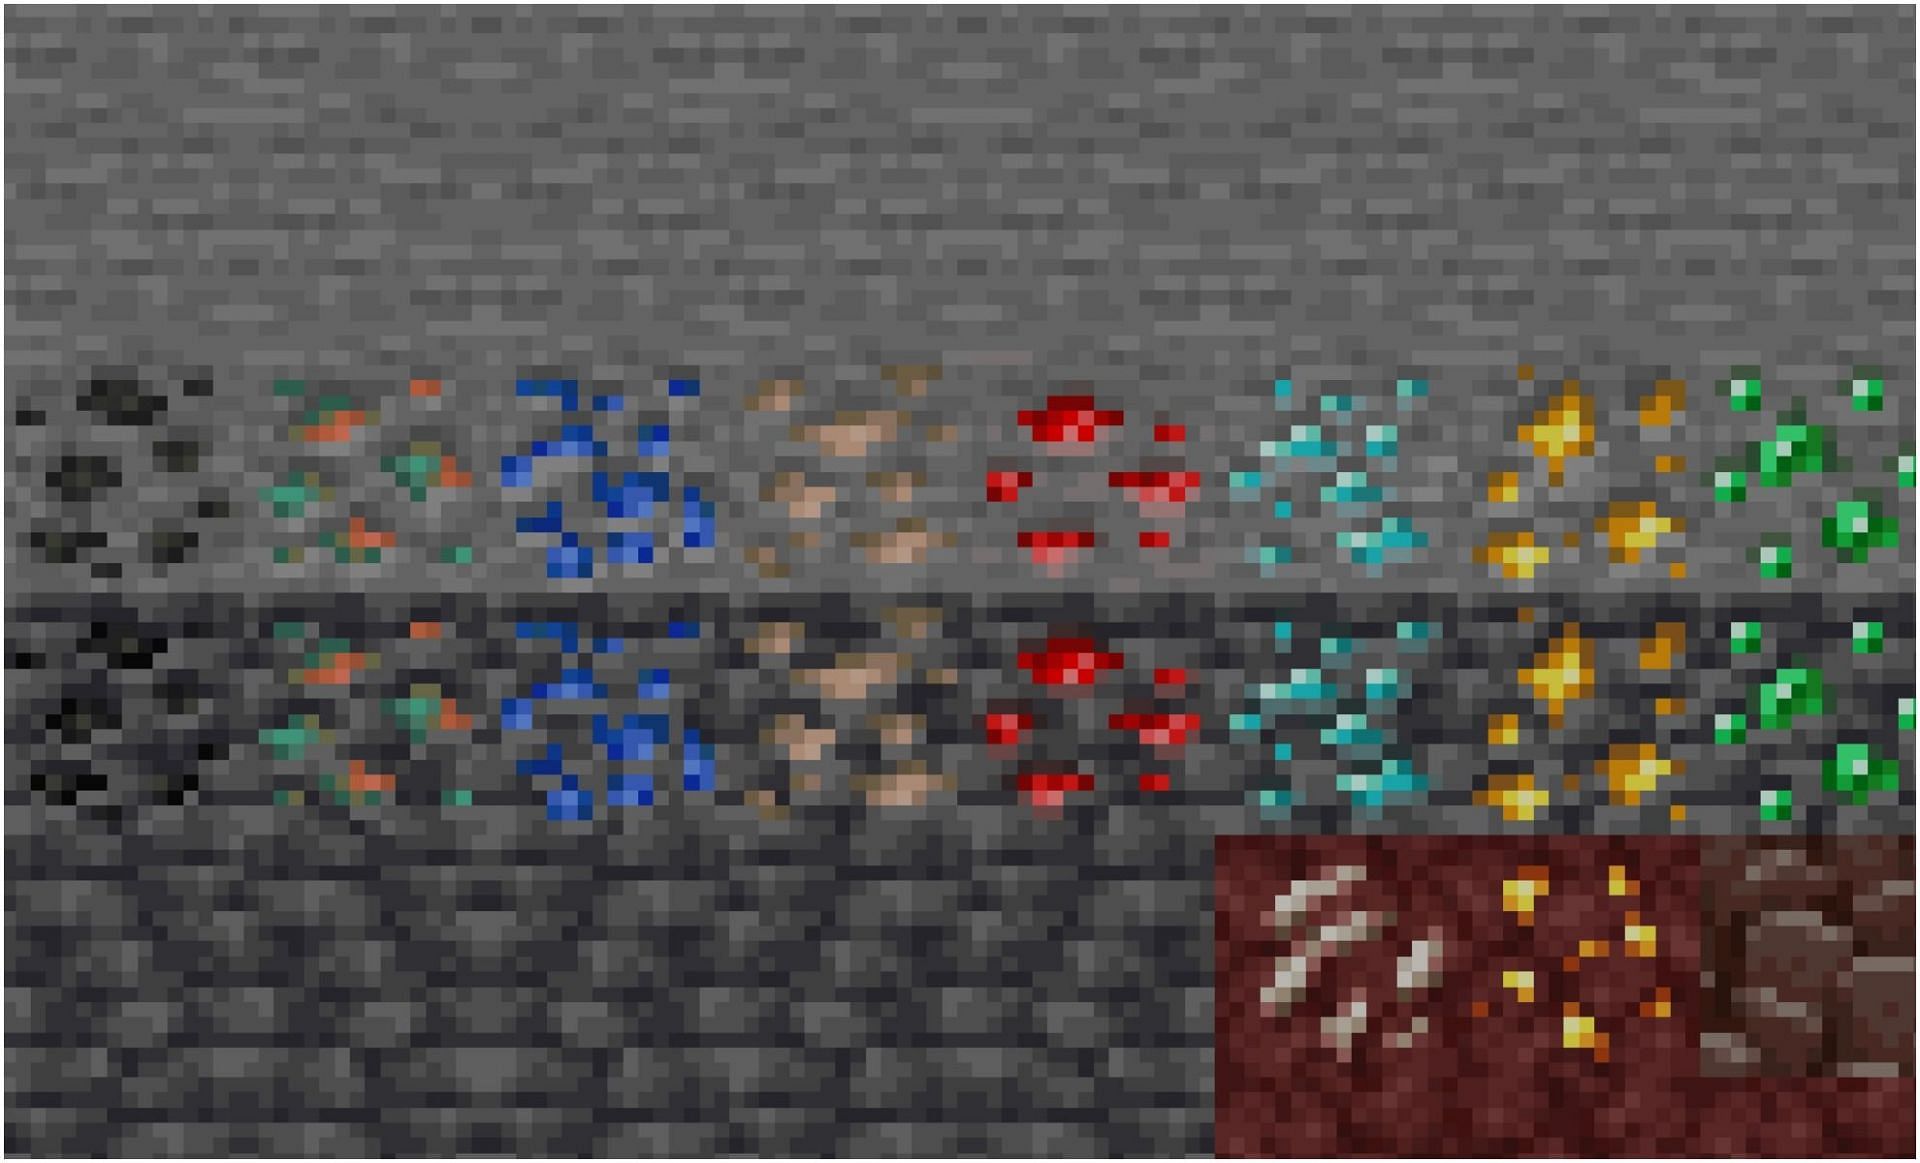 Ores generate in larger chains in Minecraft 1.18 (Image via Minecraft)